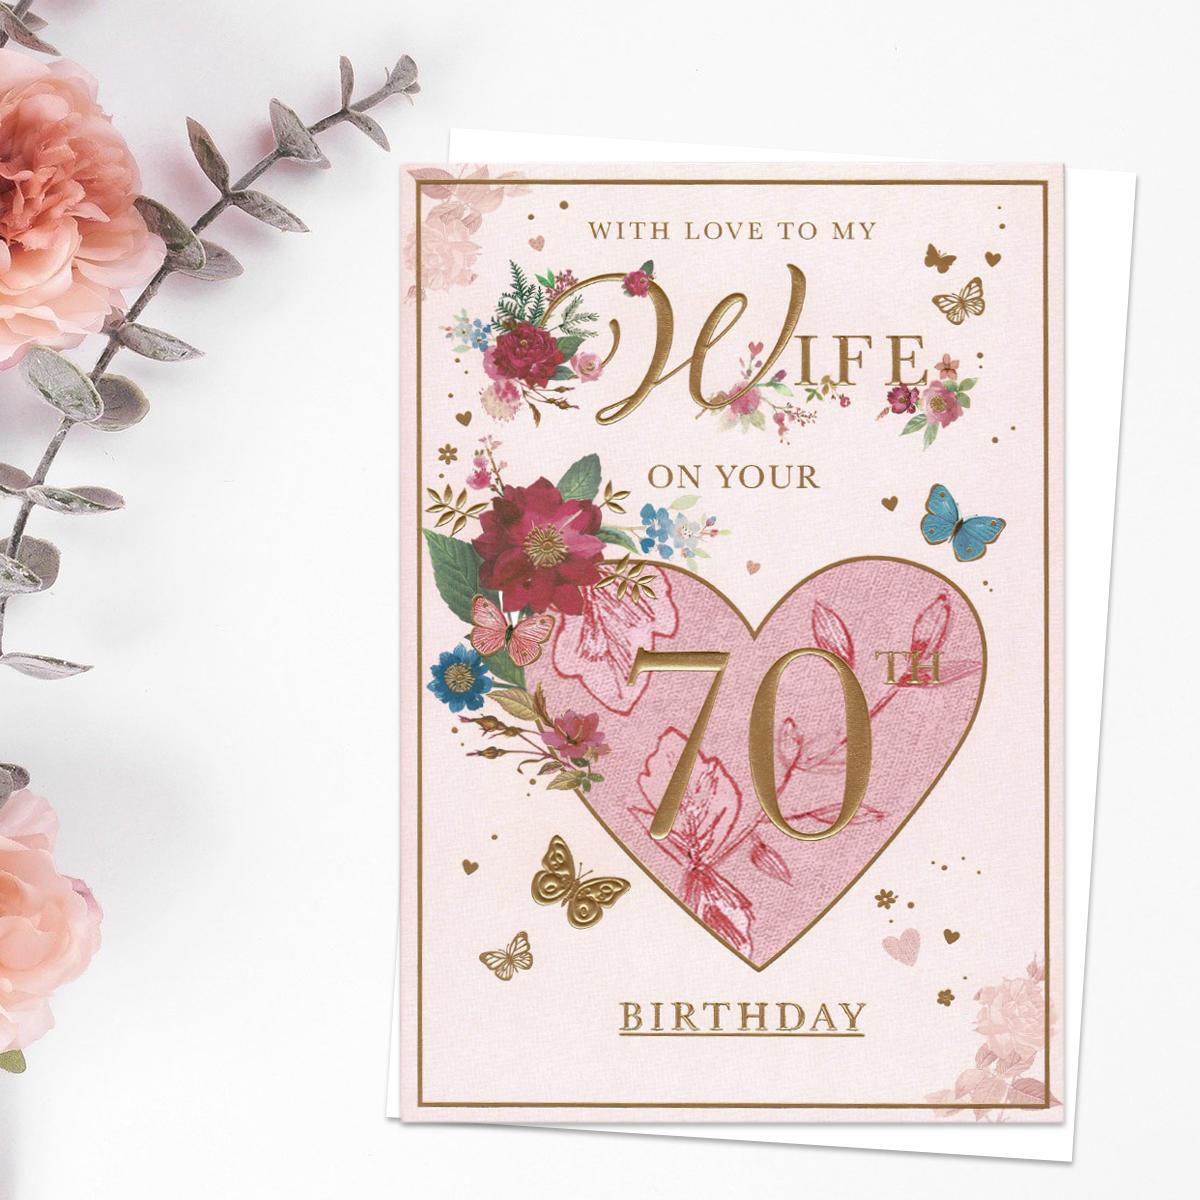 Wife On Your 70th Birthday Floral Heart Card Front Image